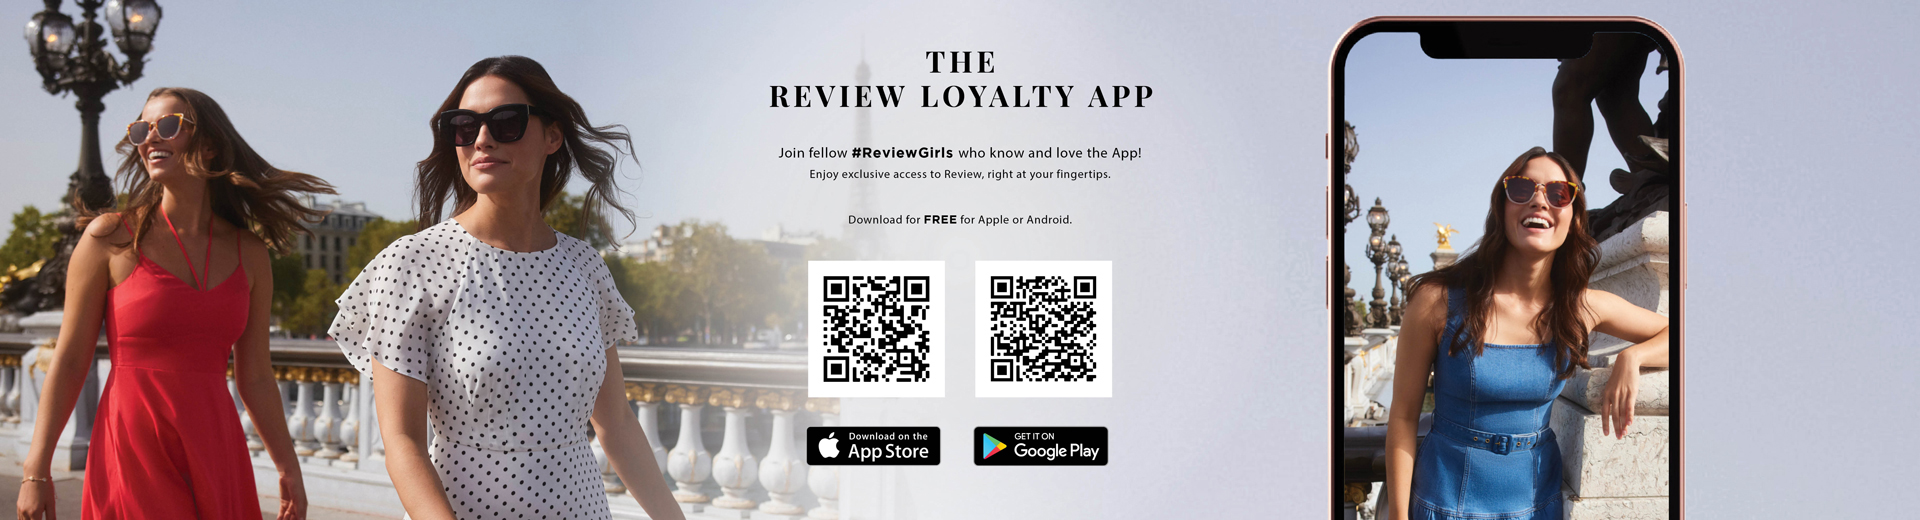 The Review Loyalty App